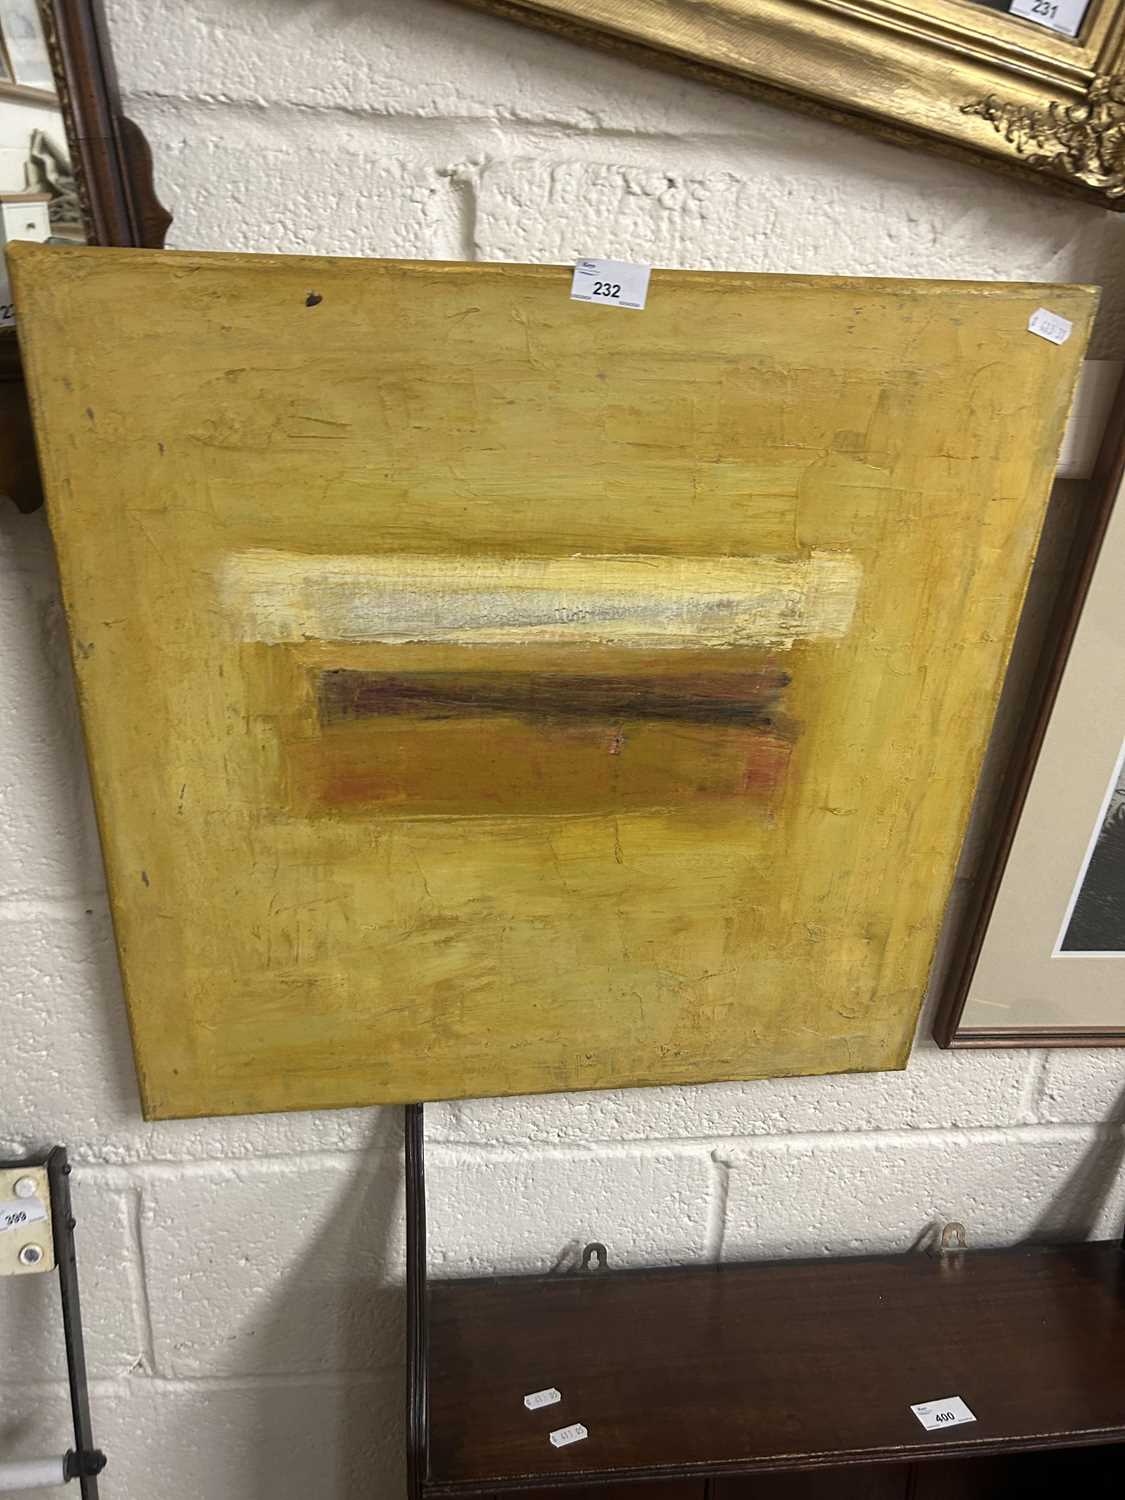 20th Century school abstract oil on canvas study, signed to the reverse possibly A.Dees and dated - Image 2 of 2